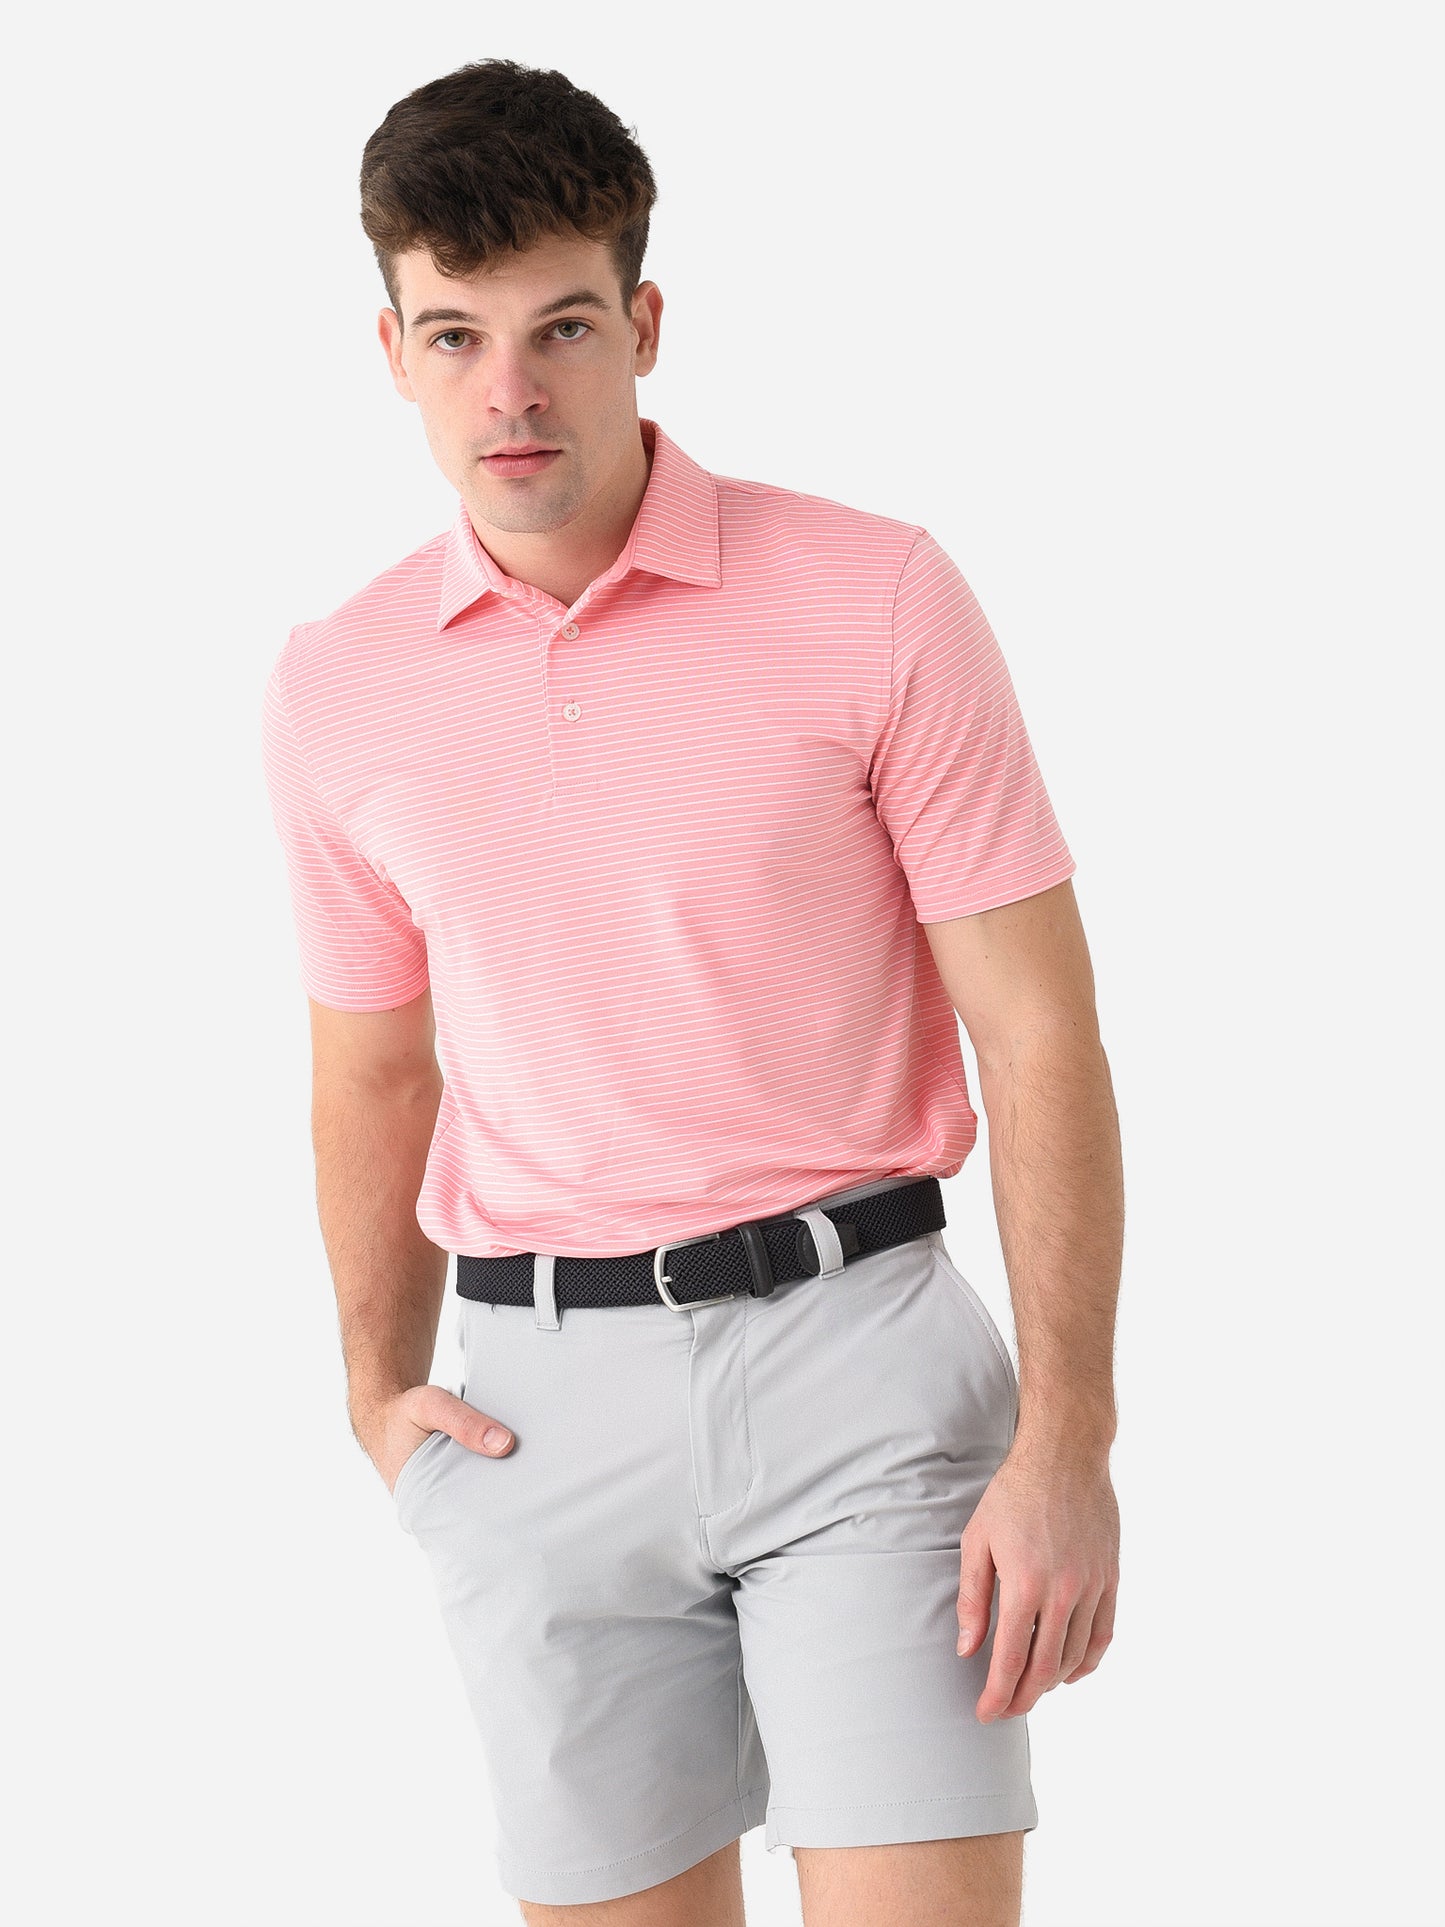 Southern Tide Men's Driver Mayfair Performance Polo